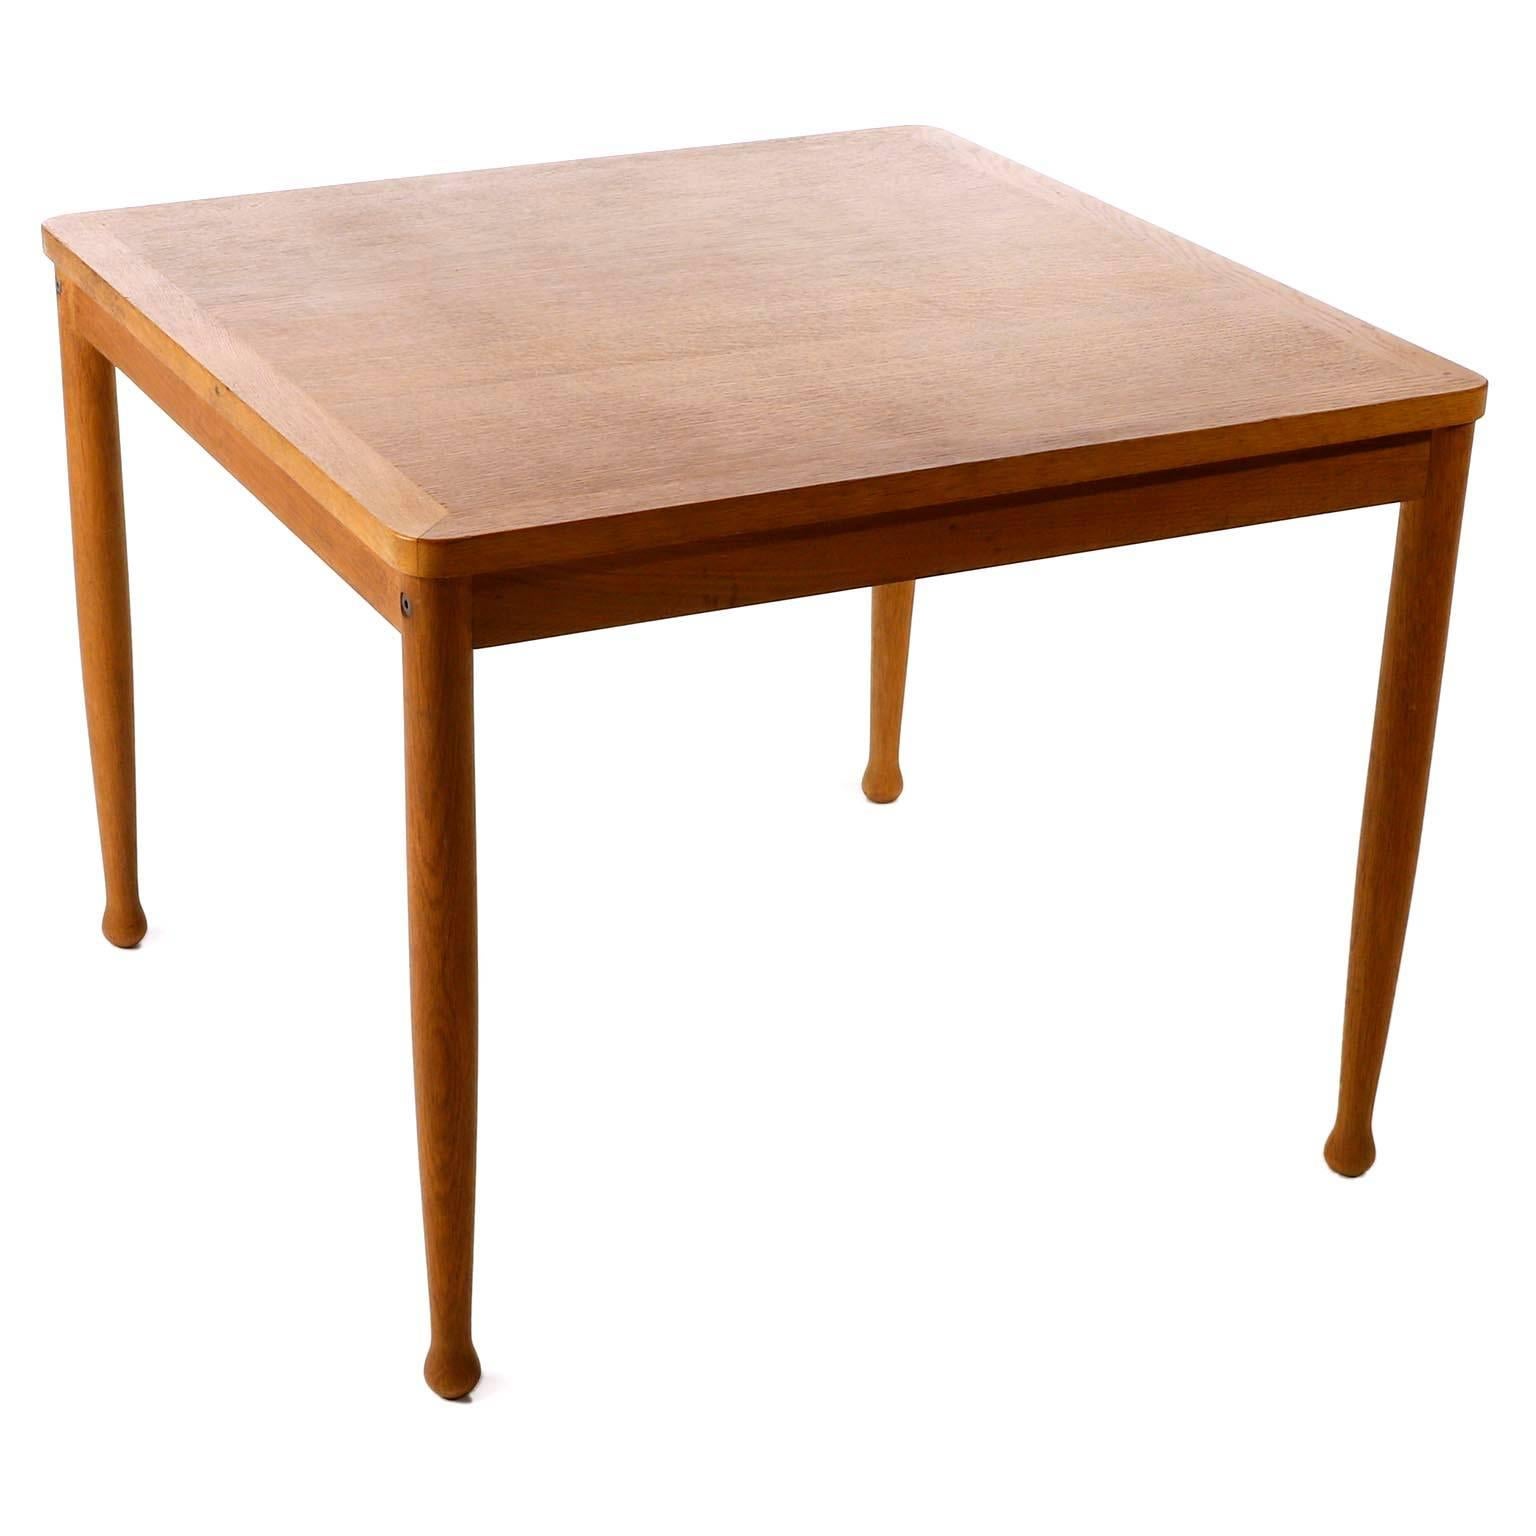 A square coffee table in a warm toned oak or elmwood designed by Erik Wørts for Niels Eilersen, Denmark, manufactured in midcentury, circa 1960 (late 1950s or early 1960s).
A great example of an organic shaped and simple and timeless designed